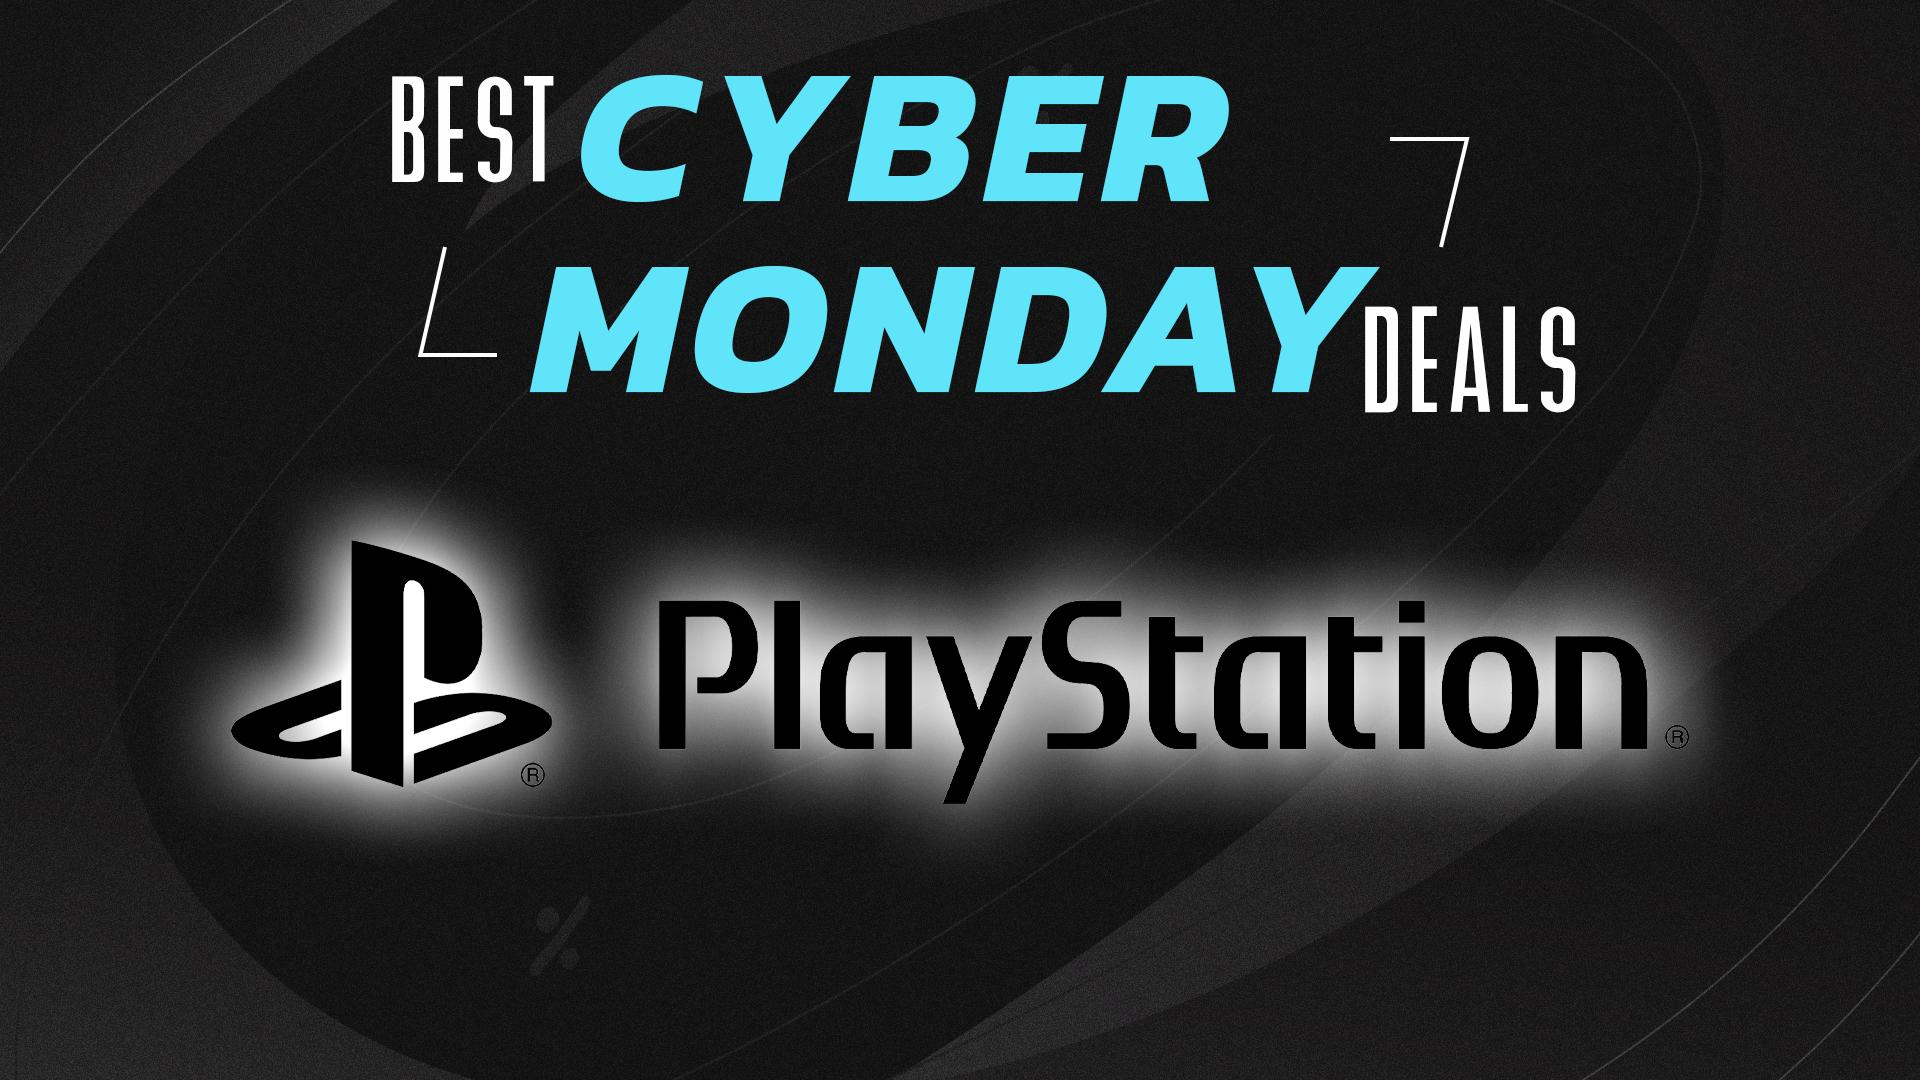 These PlayStation Cyber Monday Deals Are Still Available - IGN